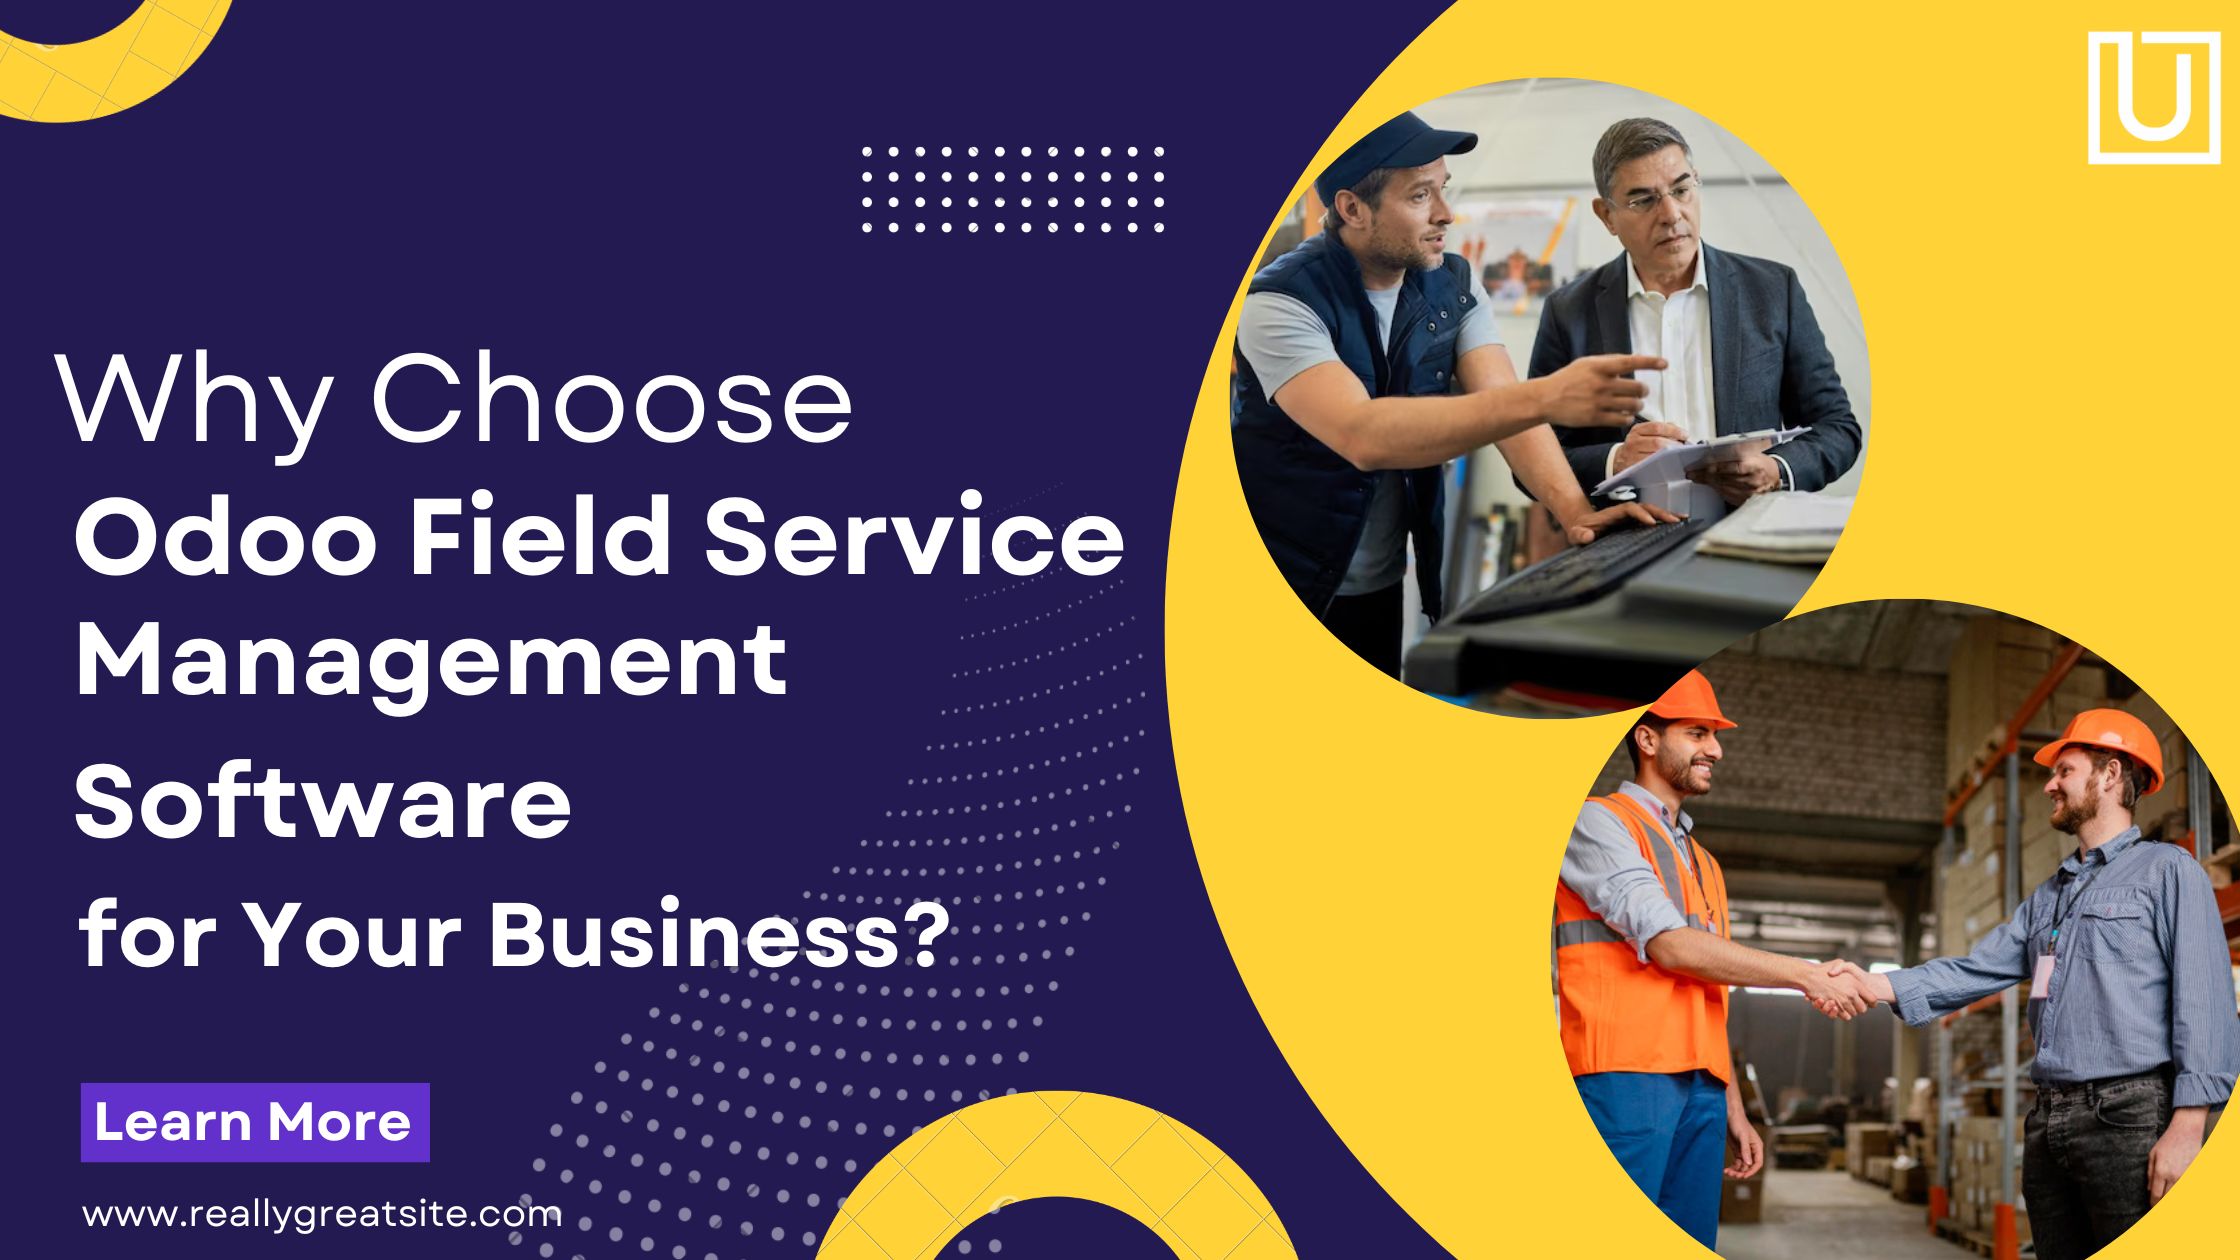 Why Choose Odoo Field Service Management Software for Your Business?